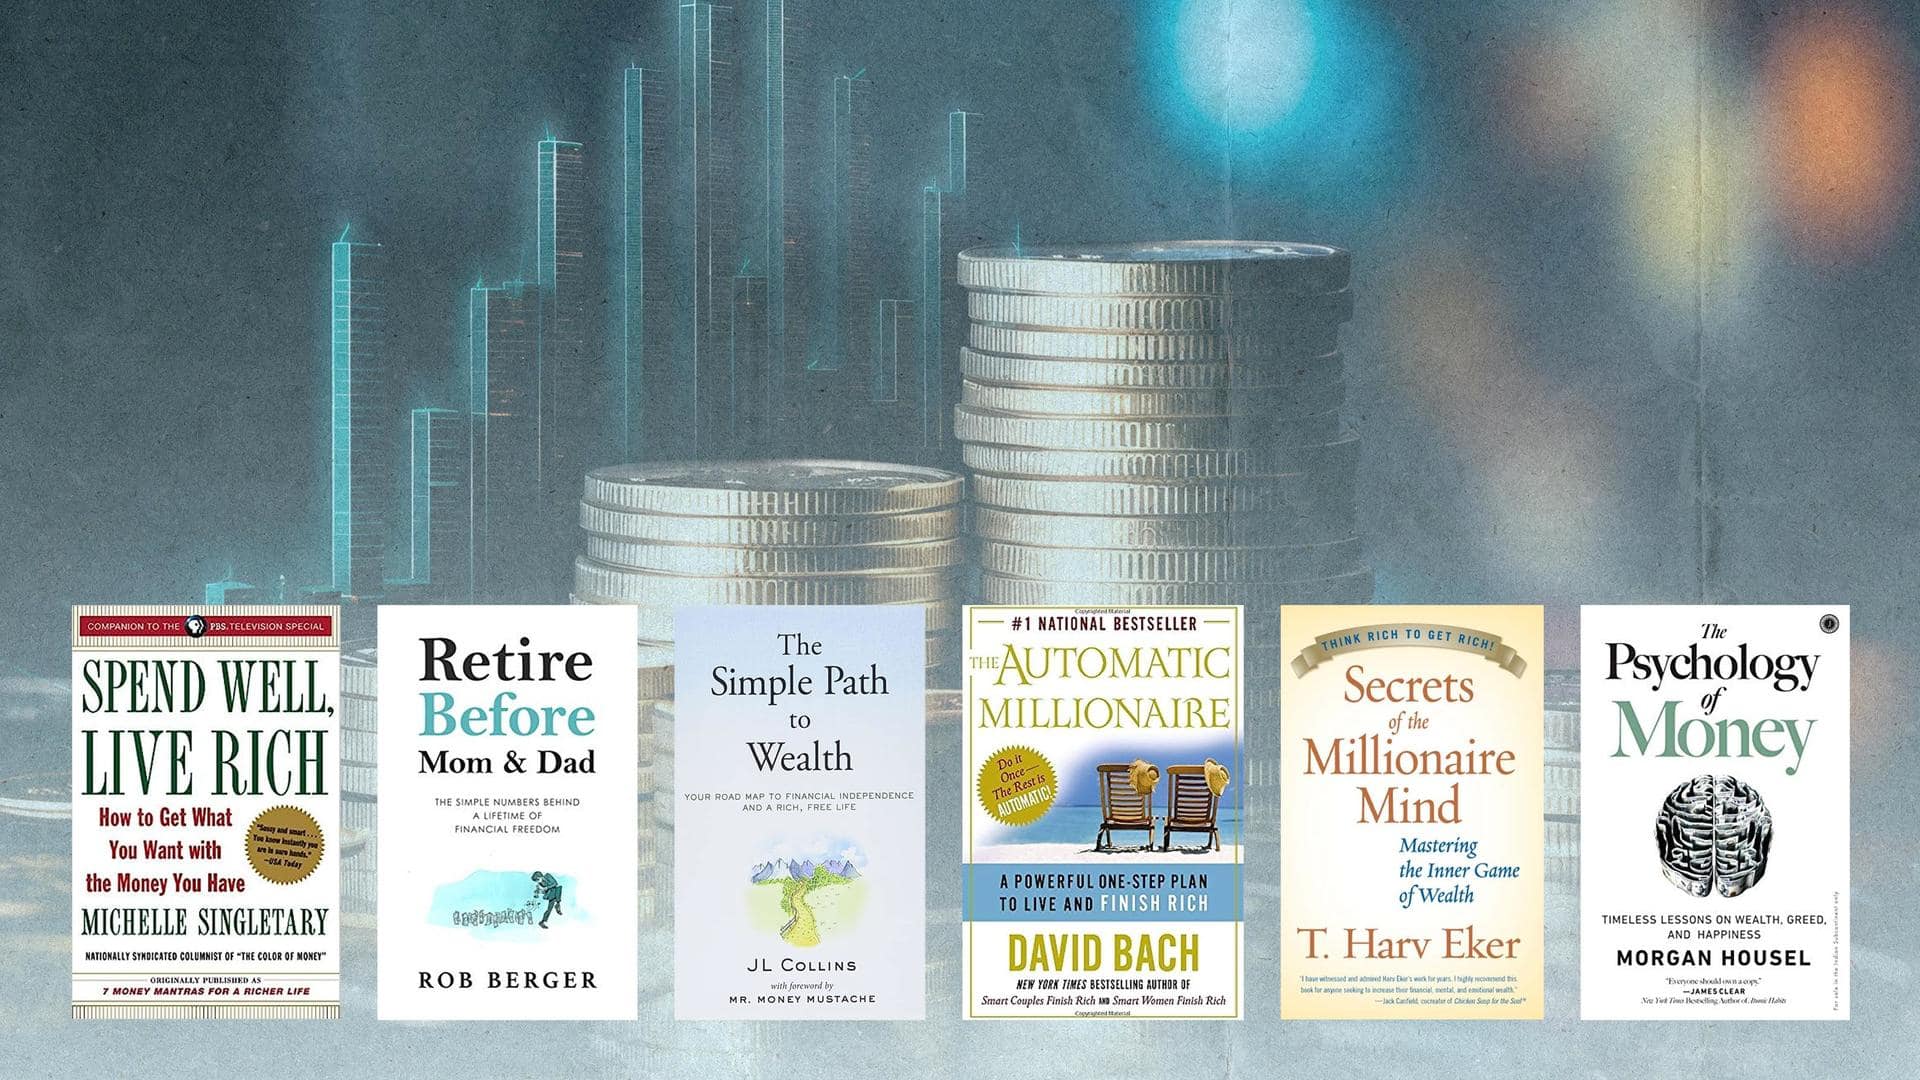 Want to understand personal finance? Read these books